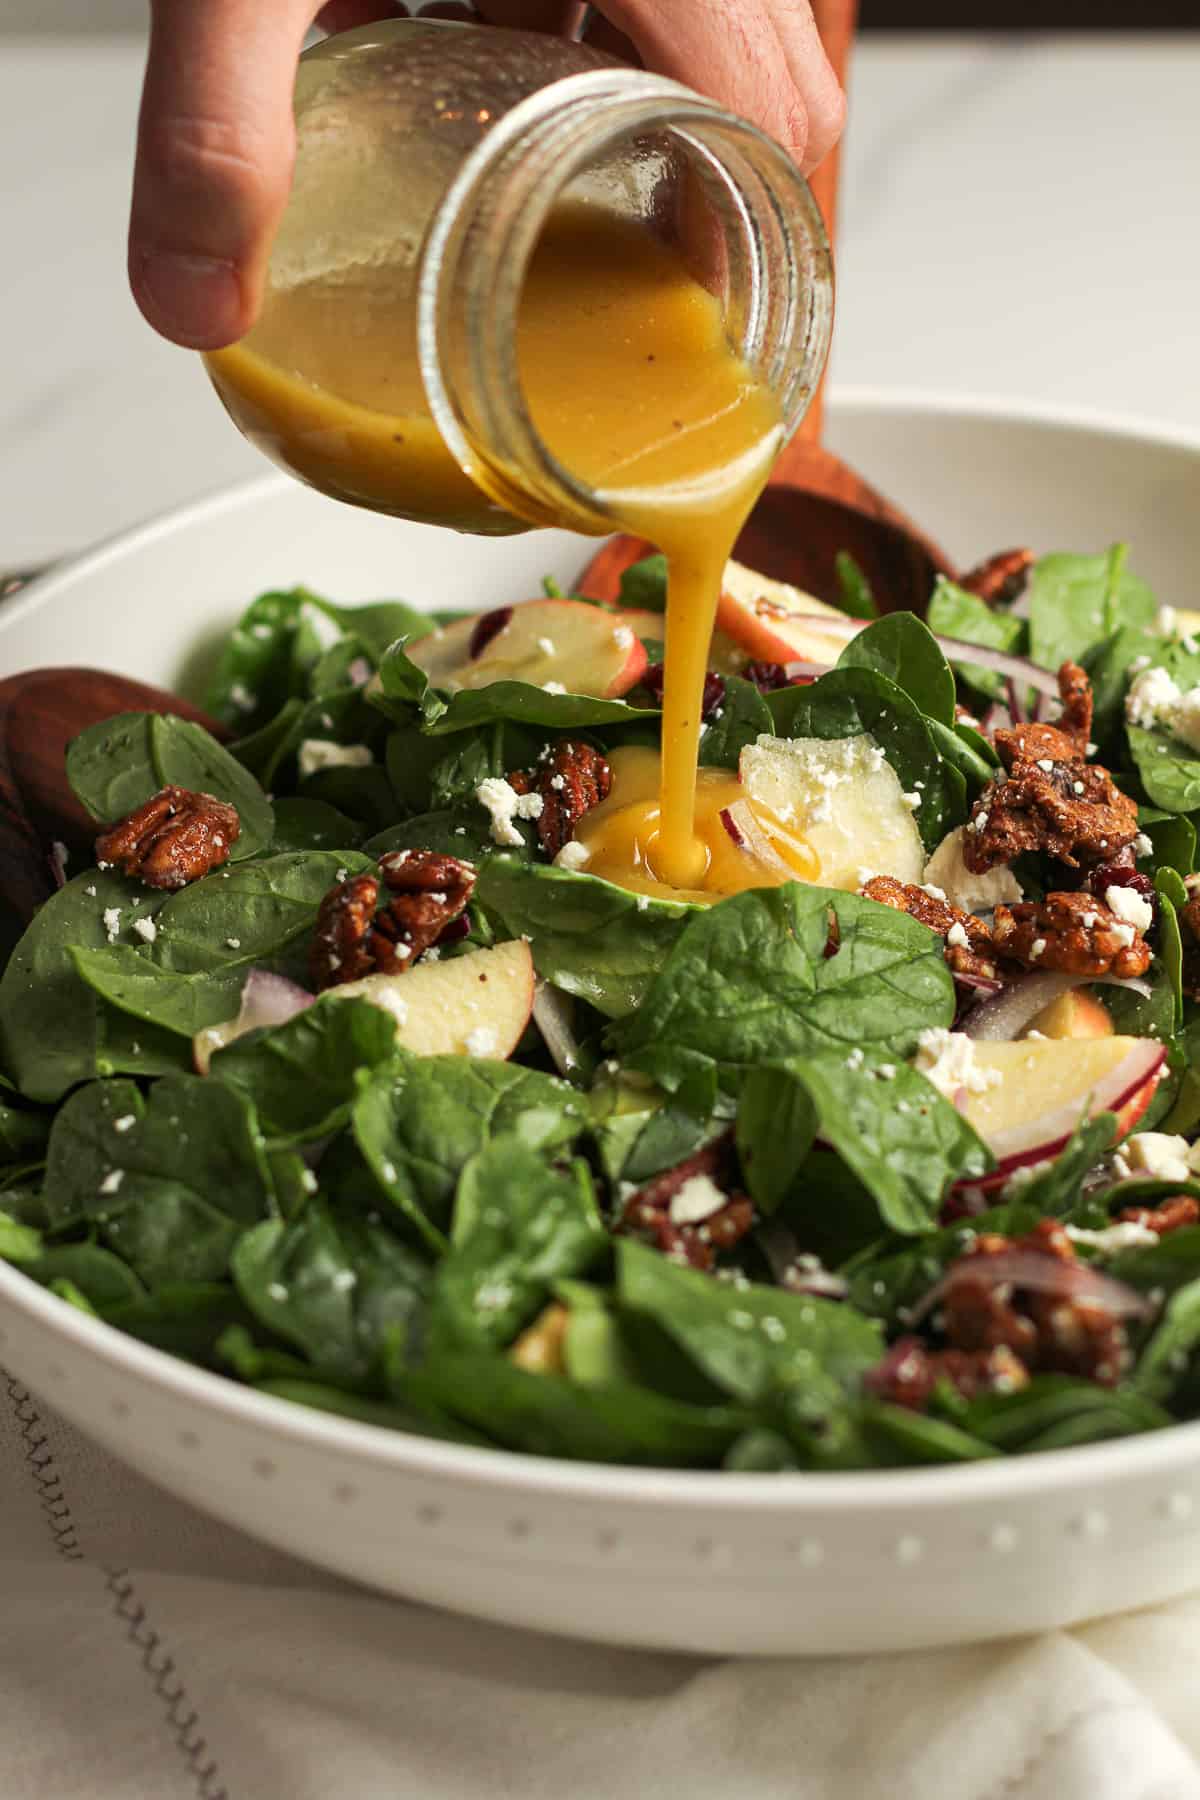 A hand drizzling the dressing over the holiday apple salad.